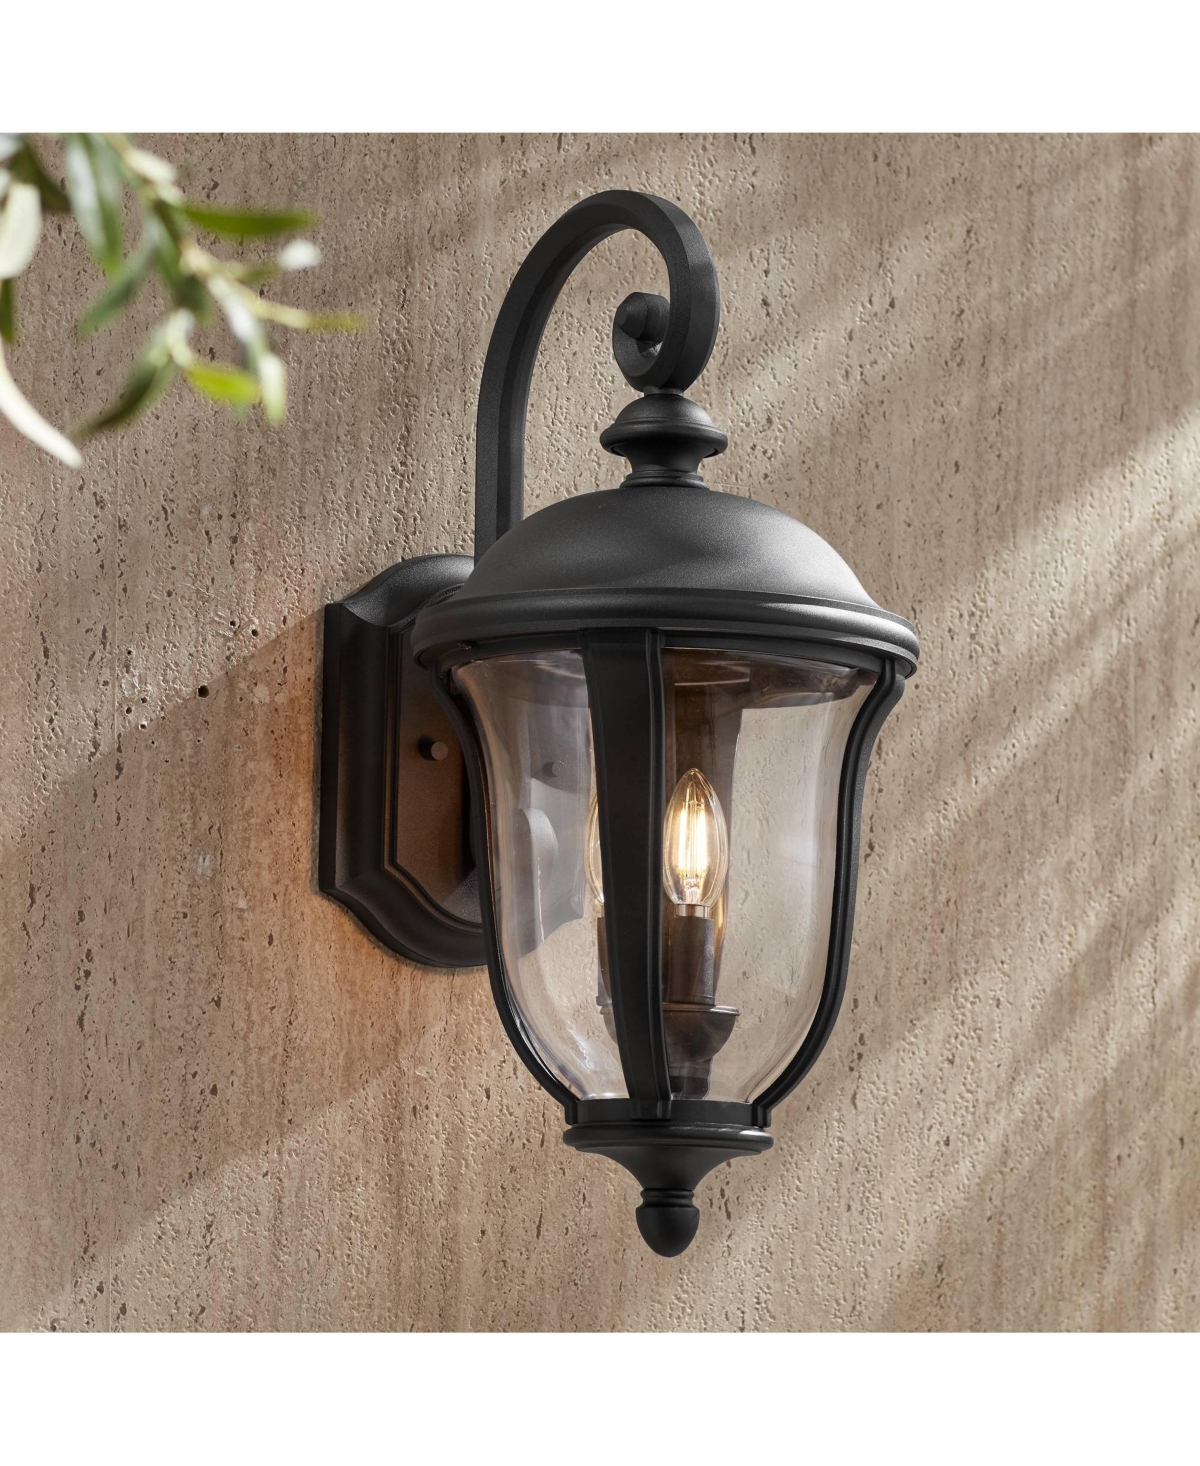 Park Sienna Vintage Outdoor Wall Light Fixture Black 22 1/4" Clear Glass Scrolling Down bridge for Exterior House Porch Patio Outside Deck Garage Yard